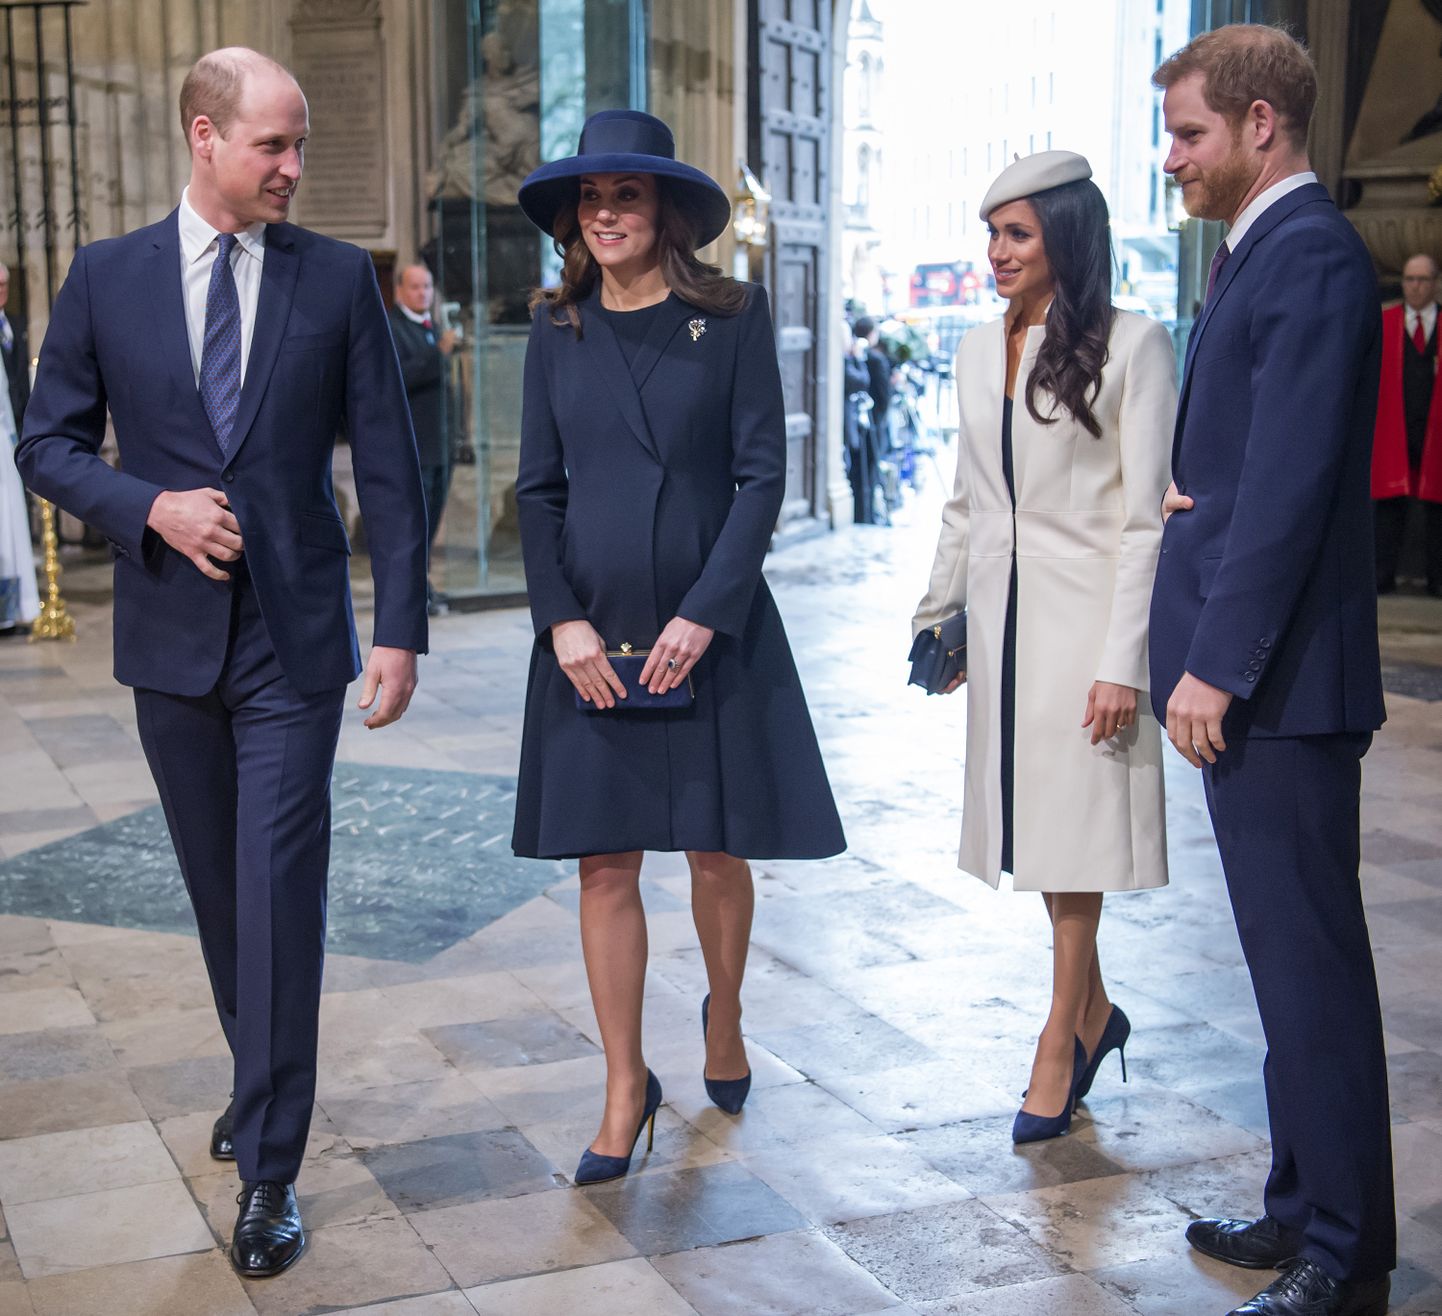 Members of The Royal Family attend the Commonwealth Day Observance Service at Westminster Abbey, London, UK, on the 12th March 2018.

Picture by Paul Grover/WPA-Pool.
12 Mar 2018
Pictured: Prince William, Duke of Cambridge, Catherine, Duchess of Cambridge, Kate Middleton, Meghan Markle, Prince Harry.
Photo credit: MEGA

TheMegaAgency.com
+1 888 505 6342